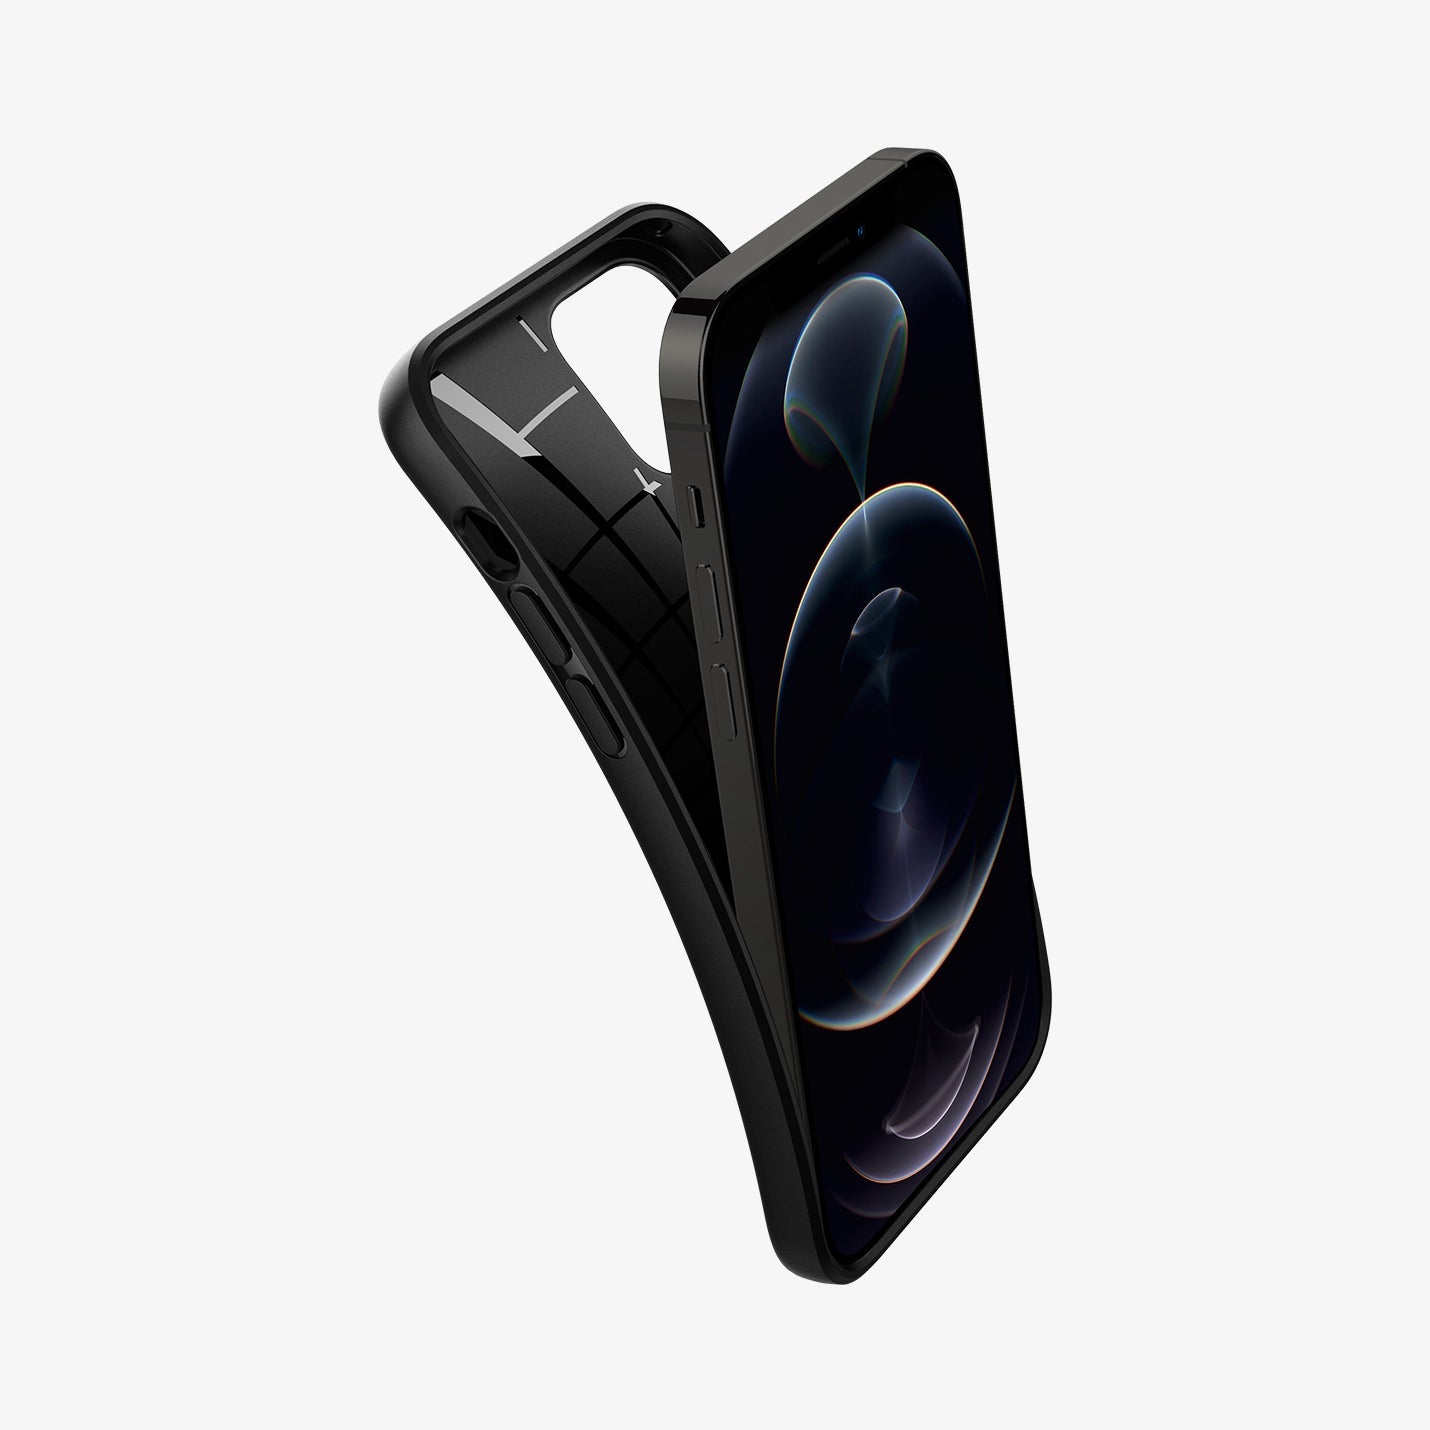 ACS01515 - iPhone 12 / iPhone 12 Pro Case Core Armor in matte black showing the case bending away from device to show the flexibility